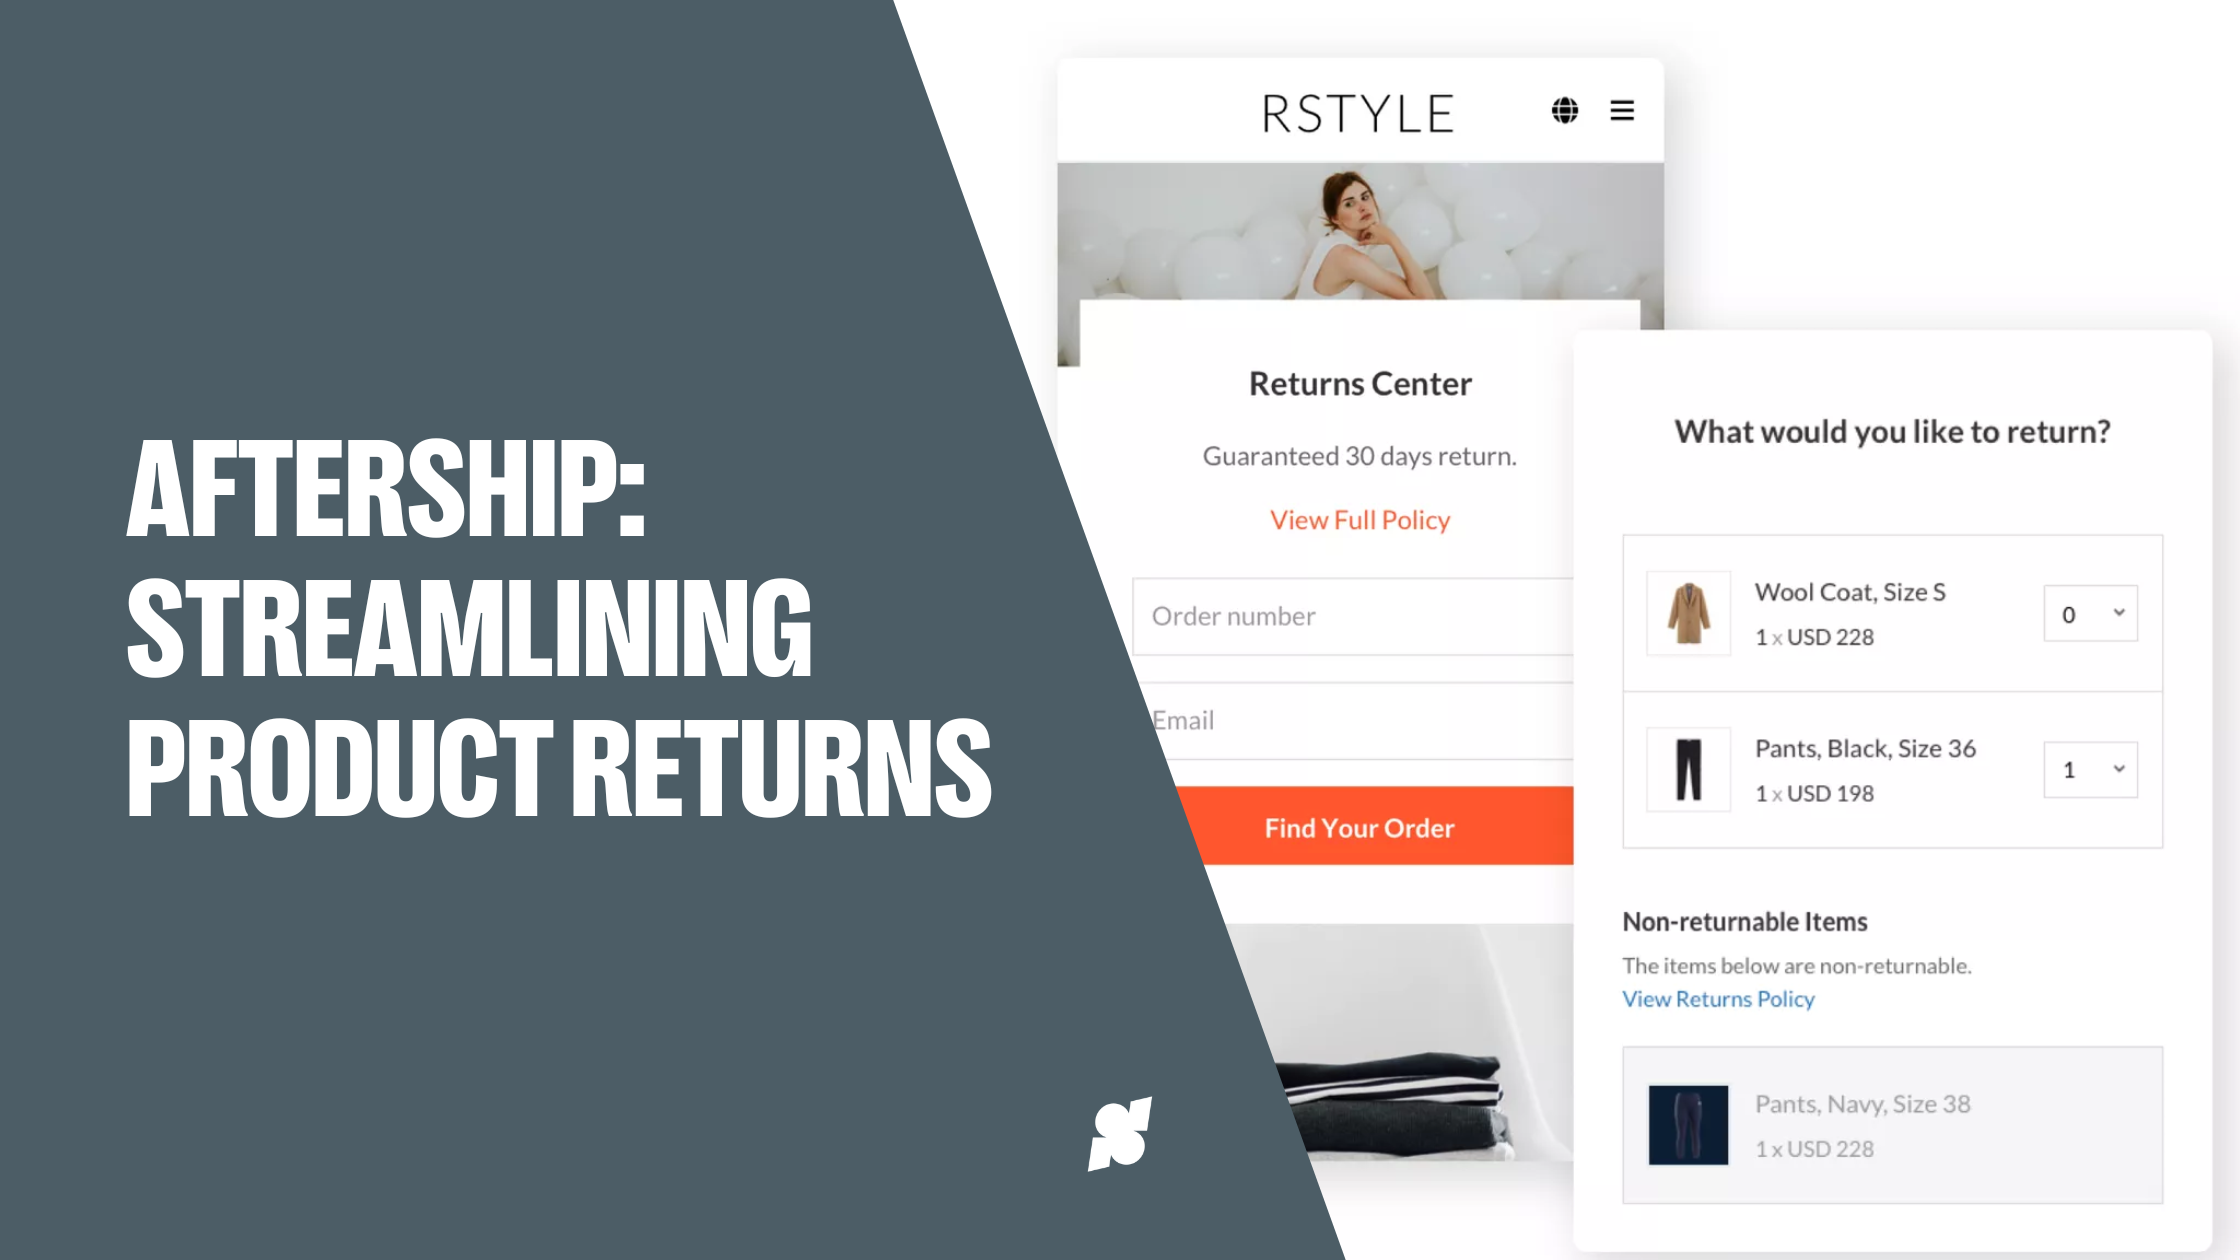 Cover image shows the words AfterShip: streamlining product returns. On the right, there is a screenshot of a return request on an online store, where the customer can select which item from an order they'd like to return.